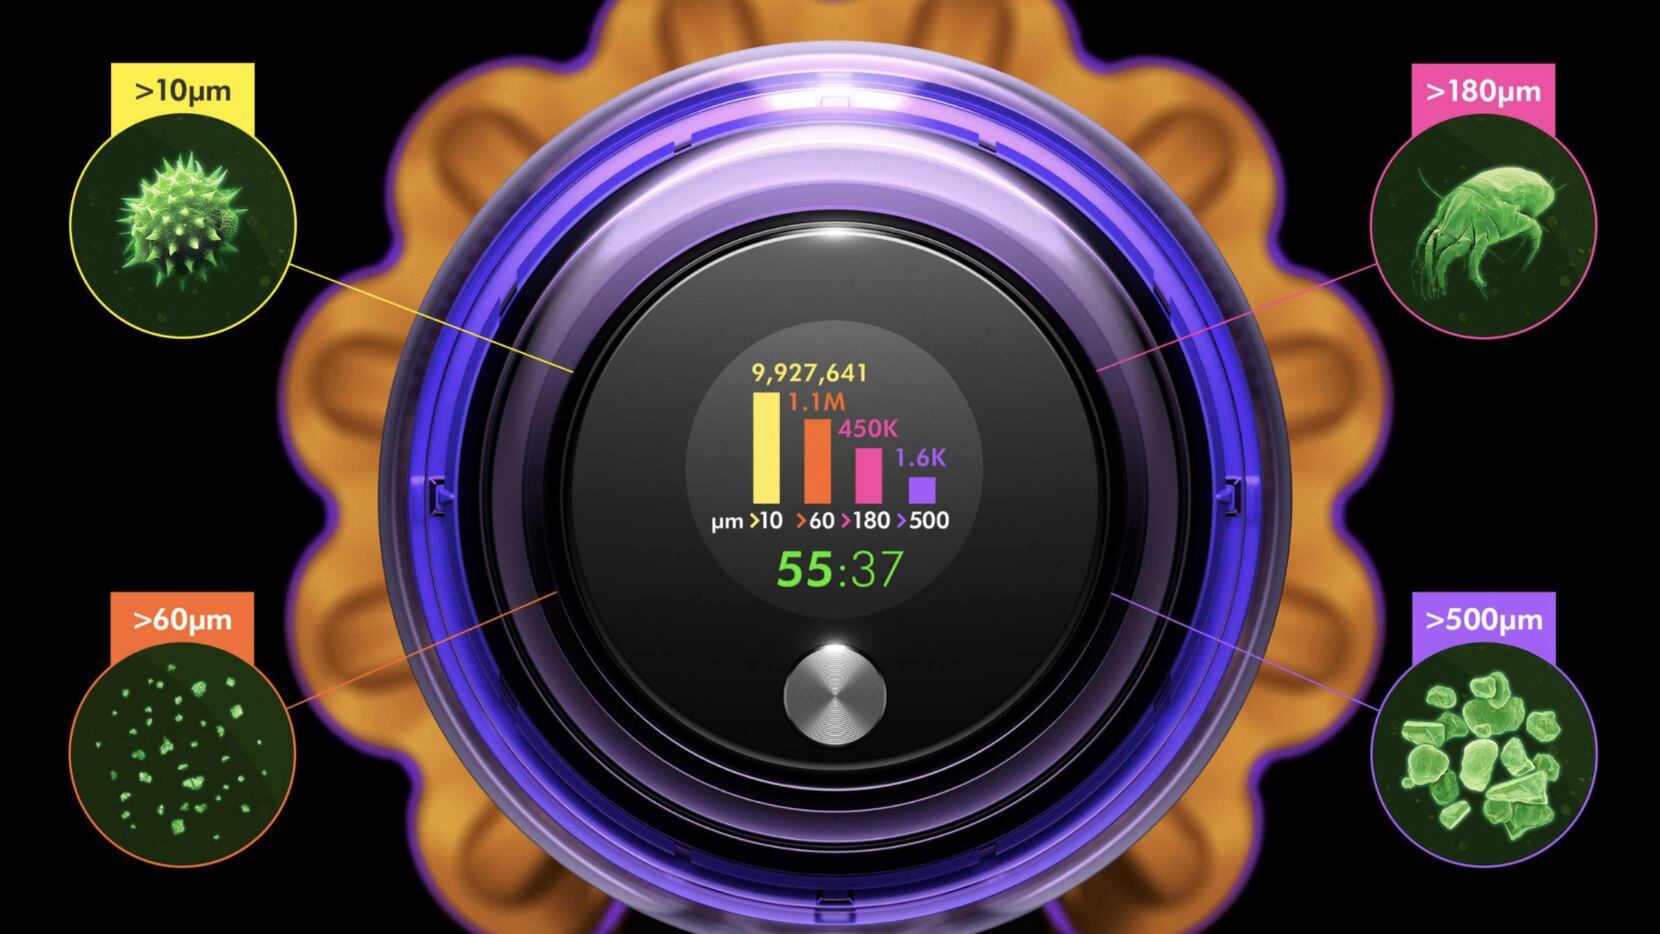 The status screen of the Dyson V15 Detect will show the amount and size of the dust particles, as well as runtime remaining.